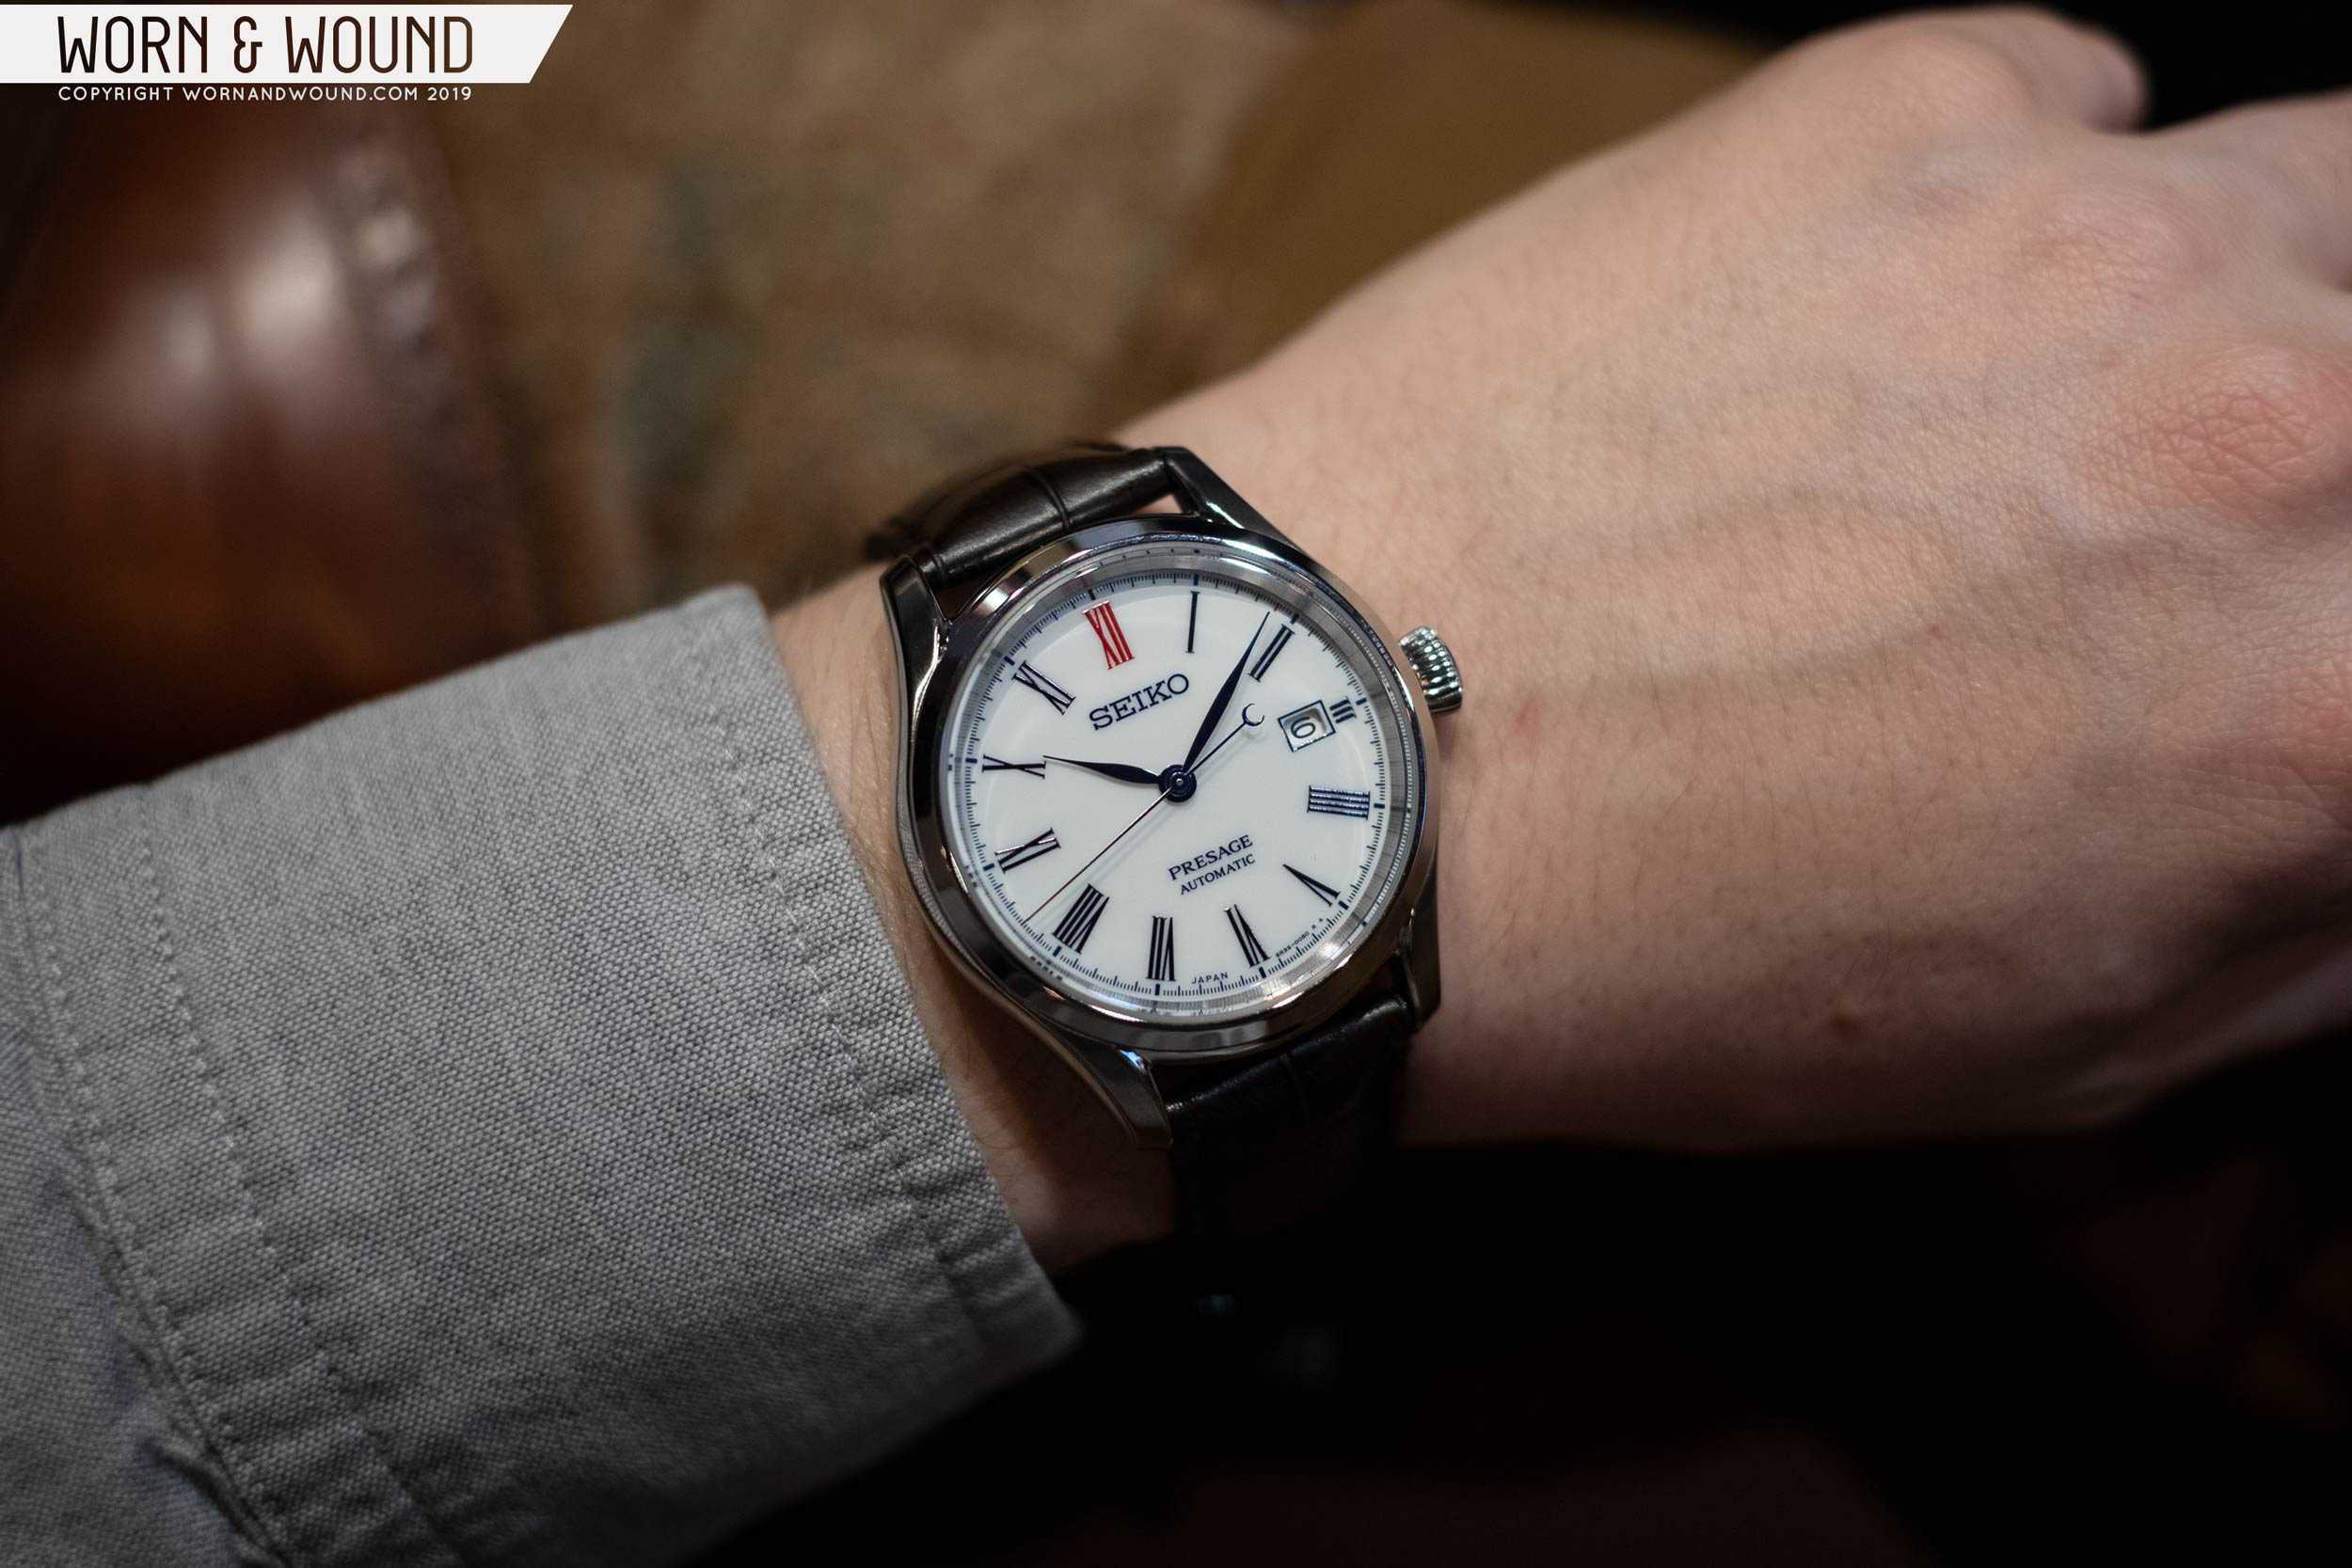 Worn & Wound - Baselworld 2019: First Look at the Seiko Presage Arita  Porcelain Dial